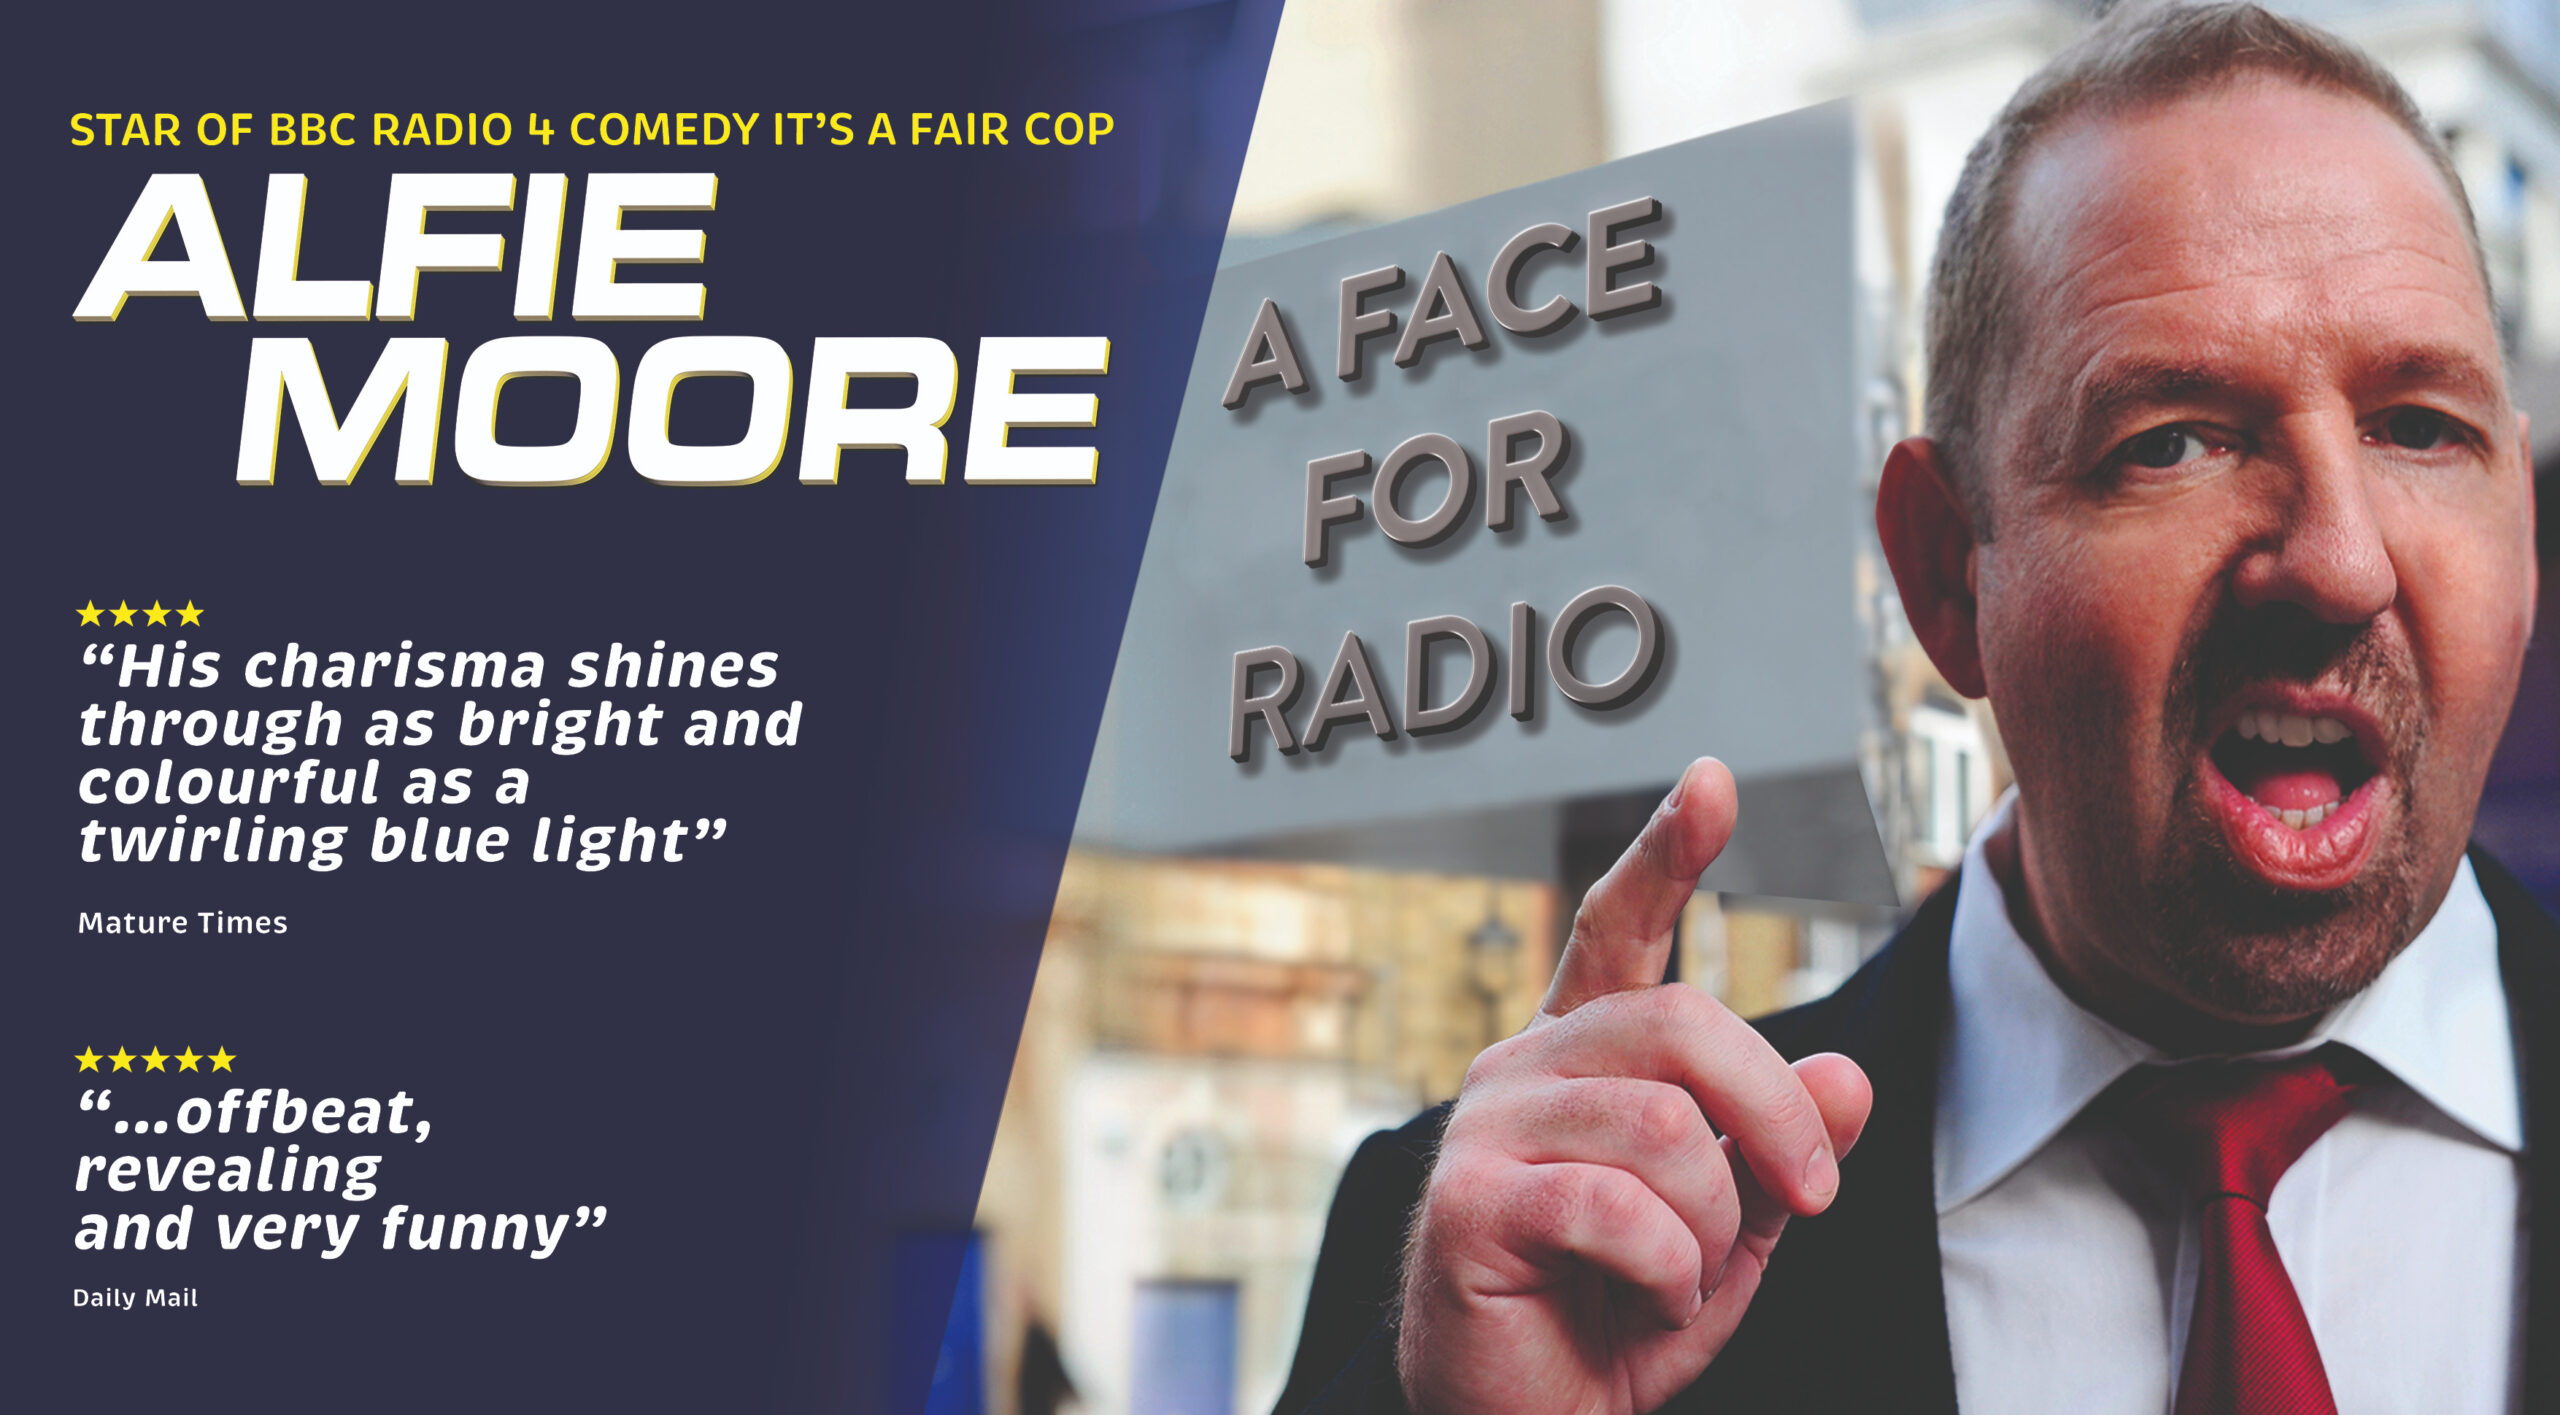 Alfie Moore: A Face for Radio Tour